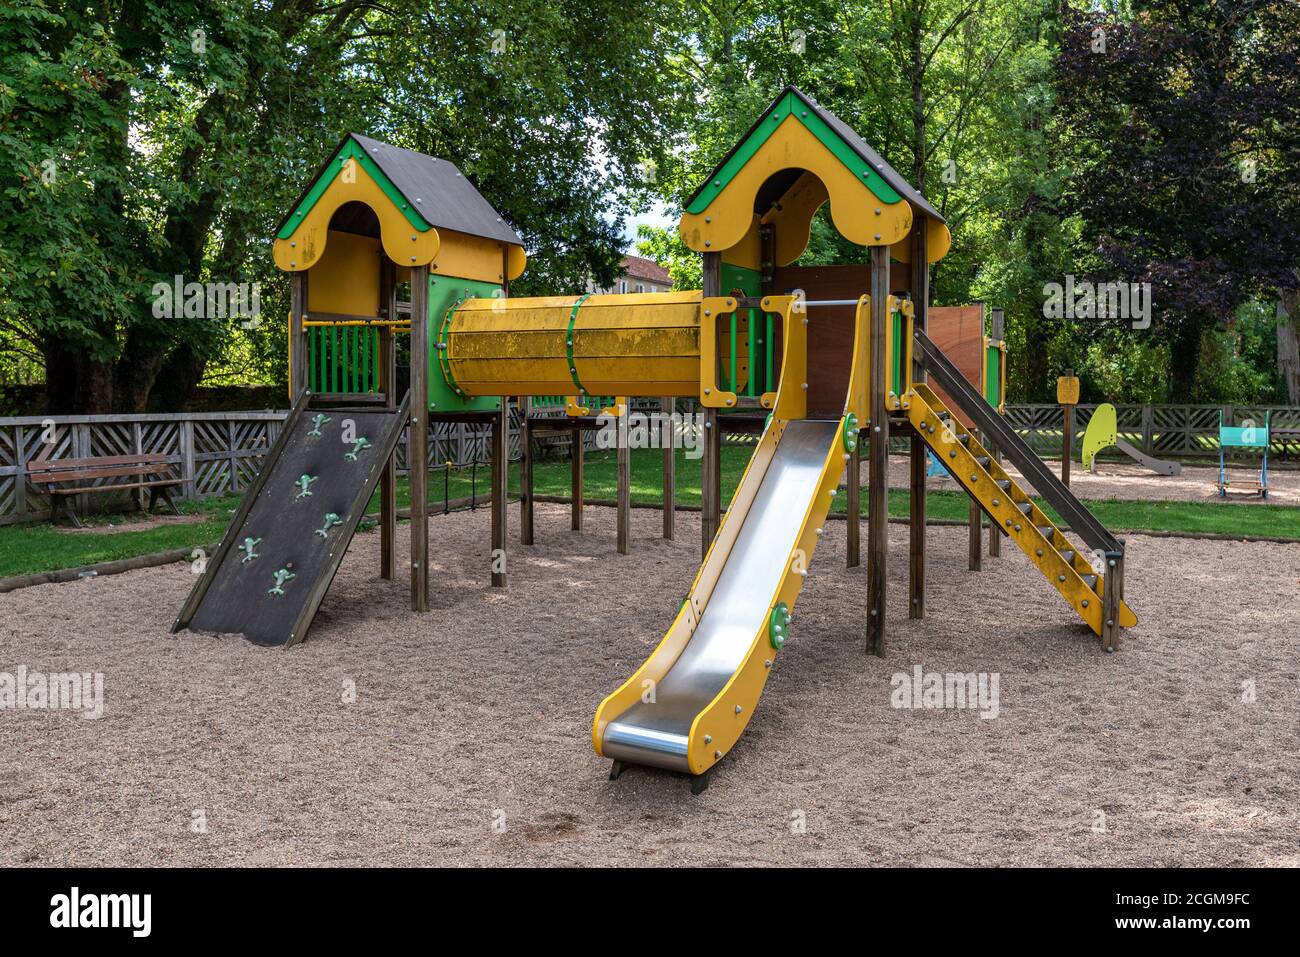 Children's playground with slide, tunnel and climbing wall in a park surrounded by trees. Stock Photo